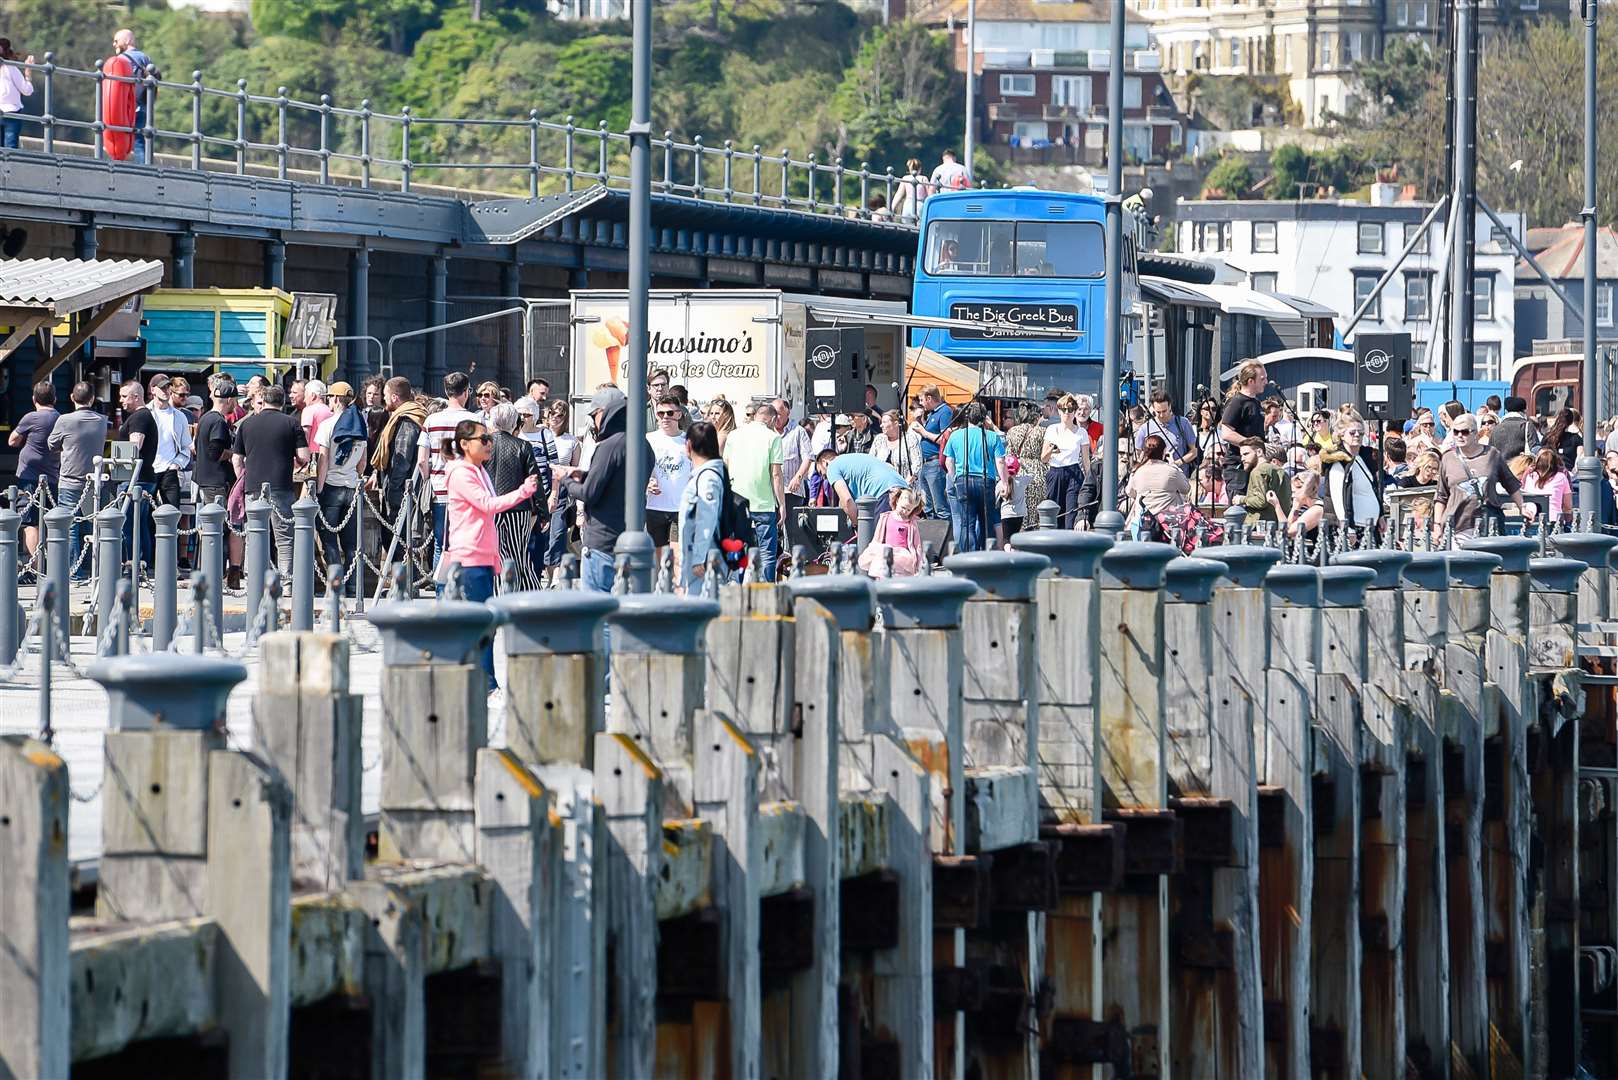 Graham Galpin singled out Folkestone, with its popular Harbour Arm, as a shining example of making a town attractive to visitors